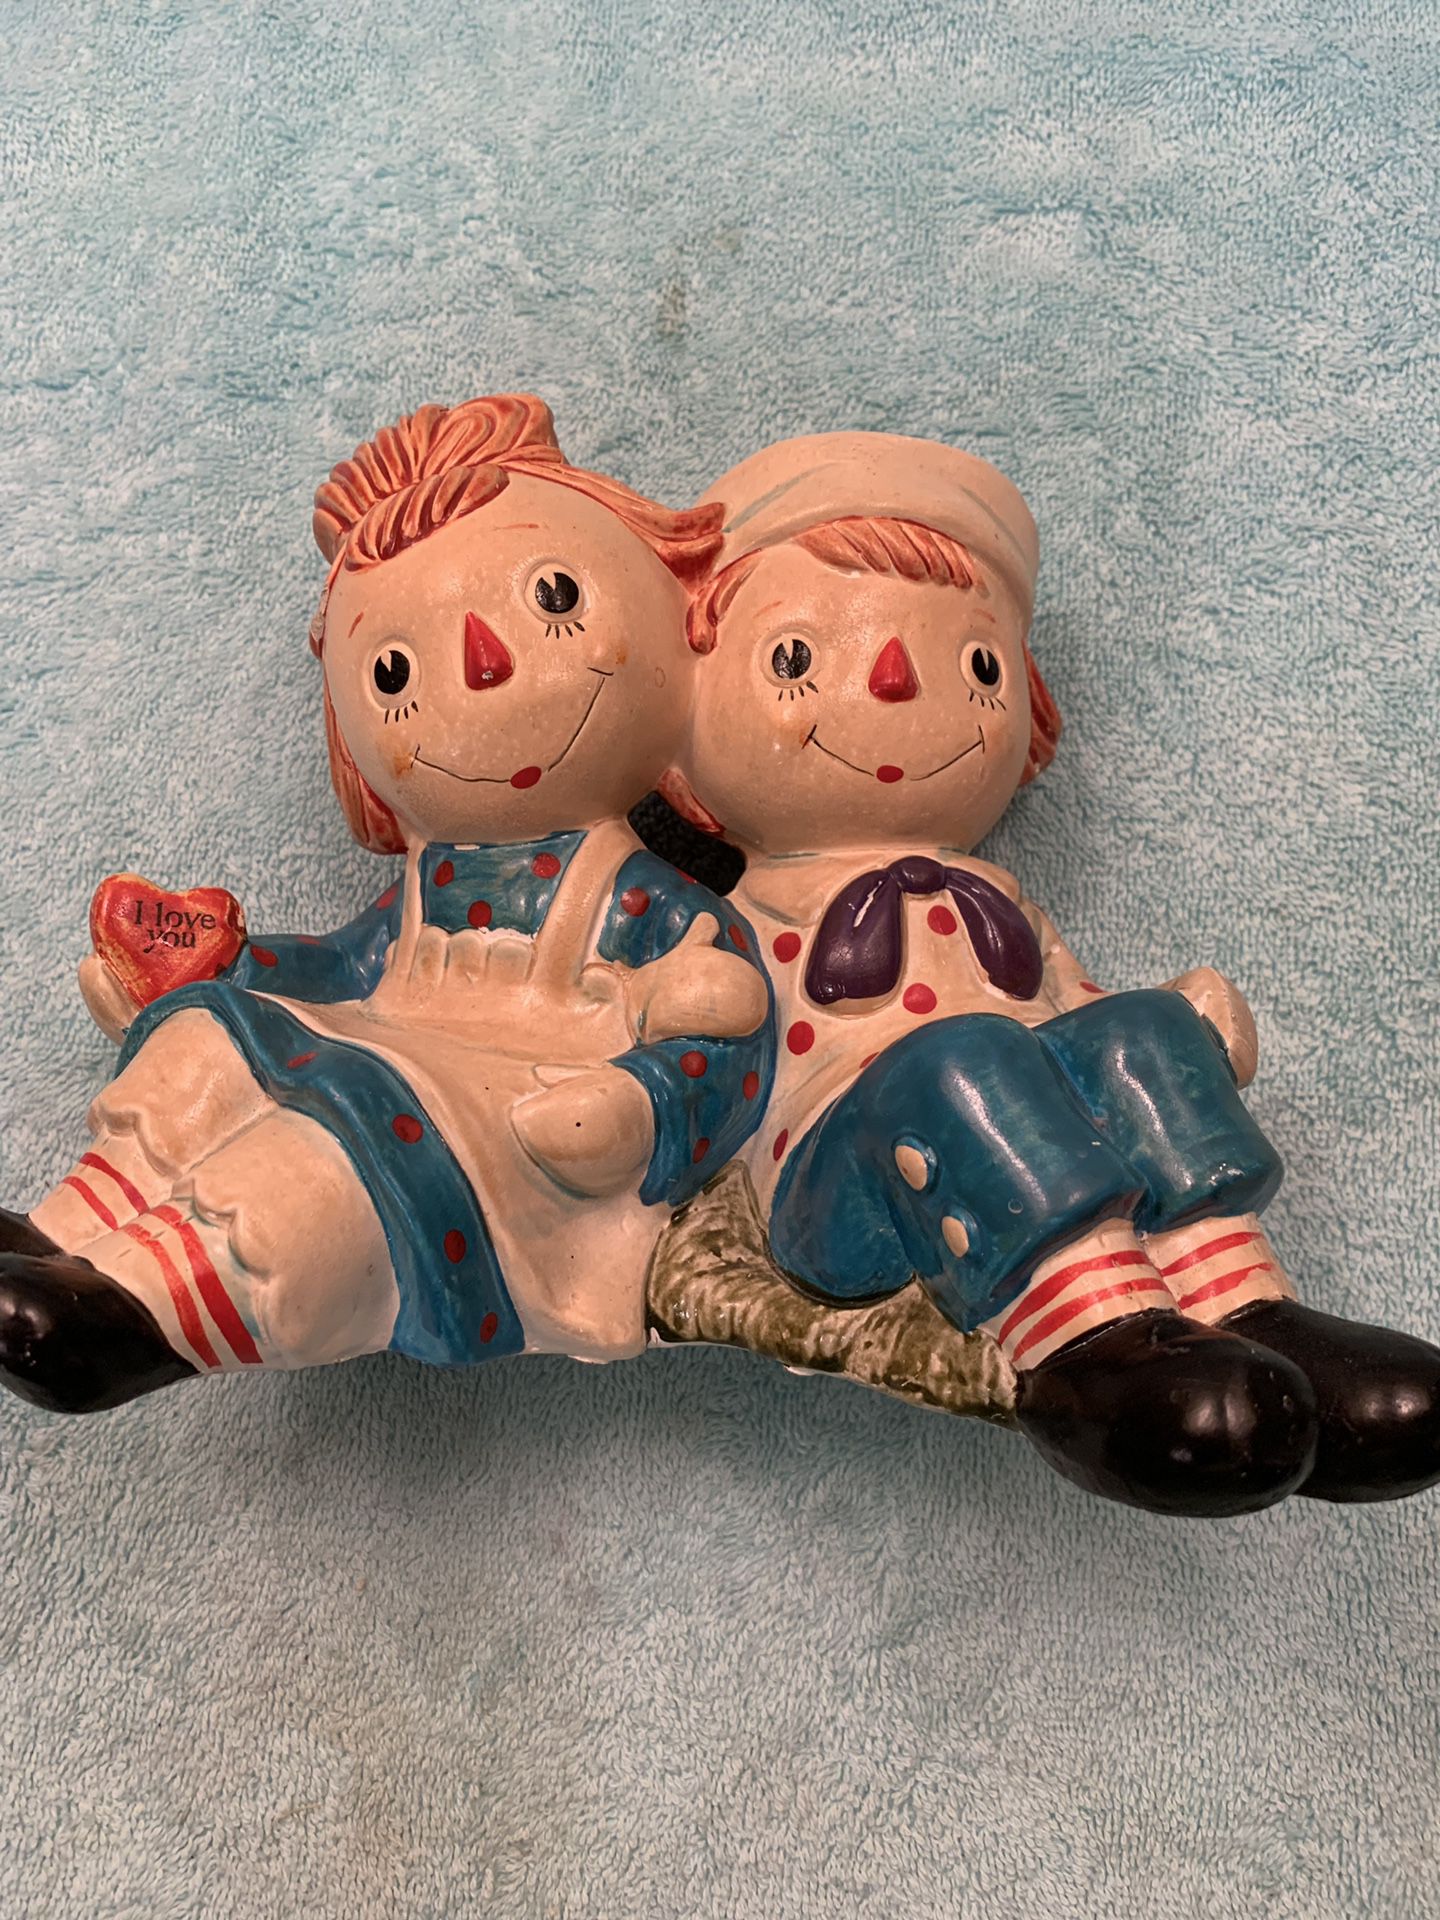 RAGGEDY ANN AND ANDY Vintage 1971 FIGURINE coin piggy bank Bobbs Merrill Japan